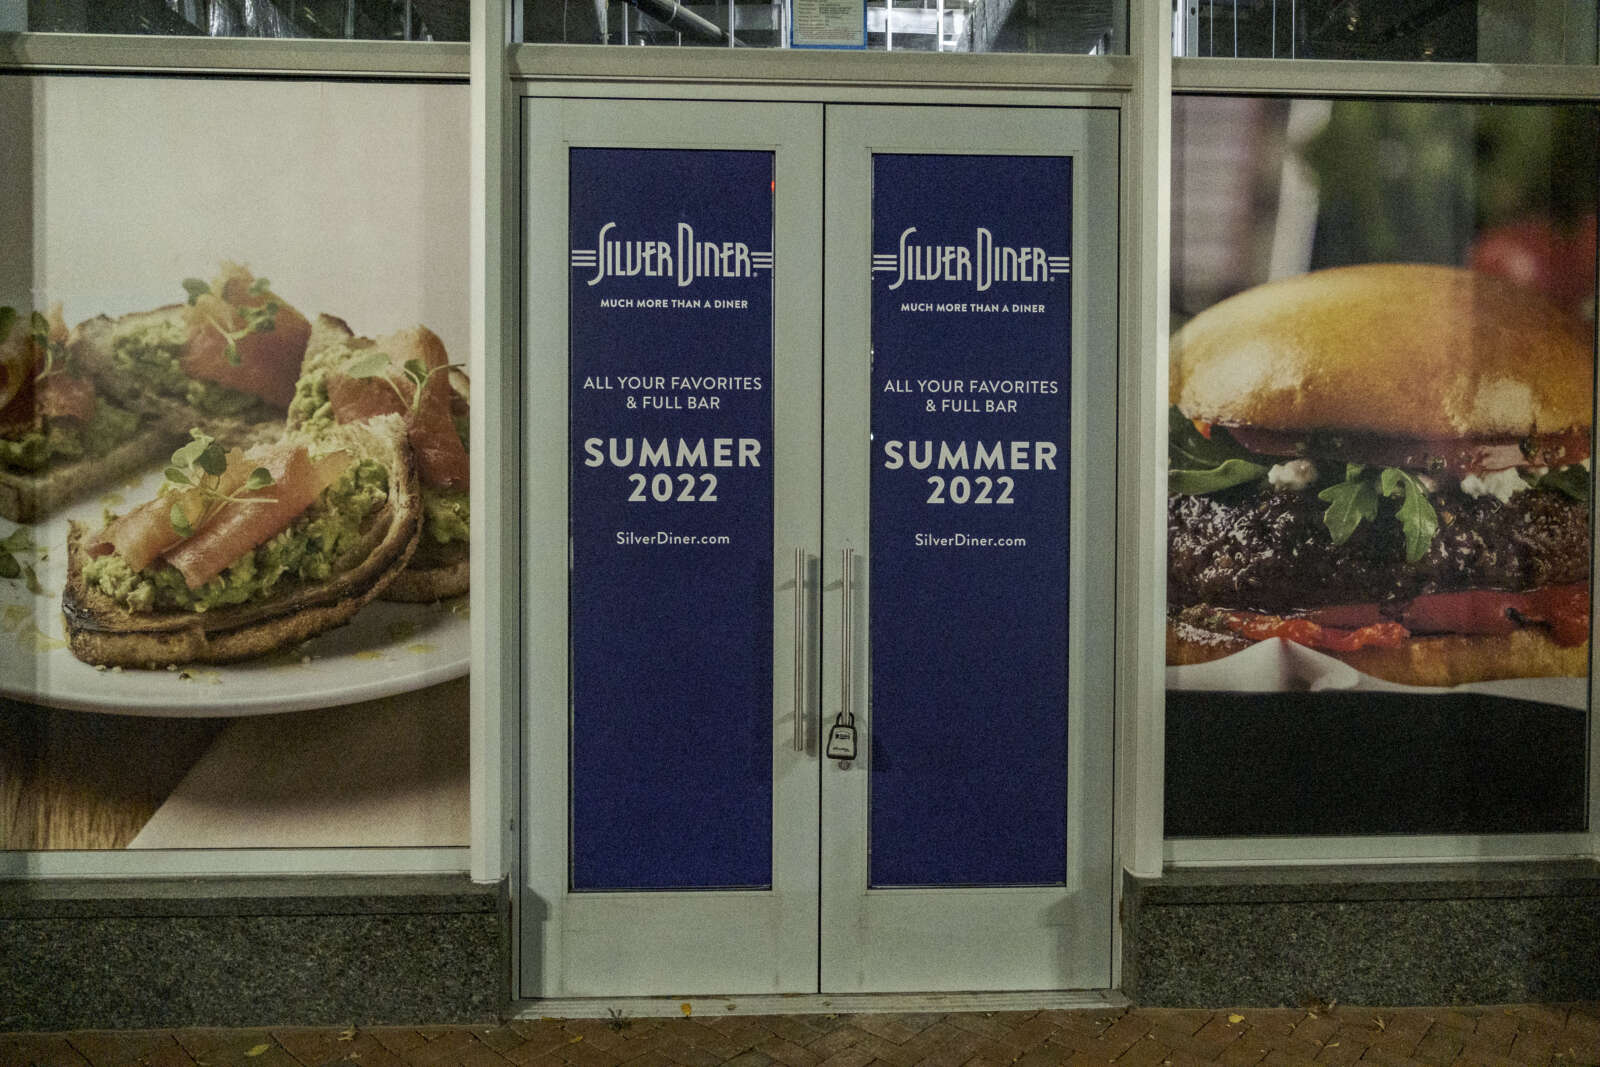 Ballston Silver Diner looking to open its doors this summer